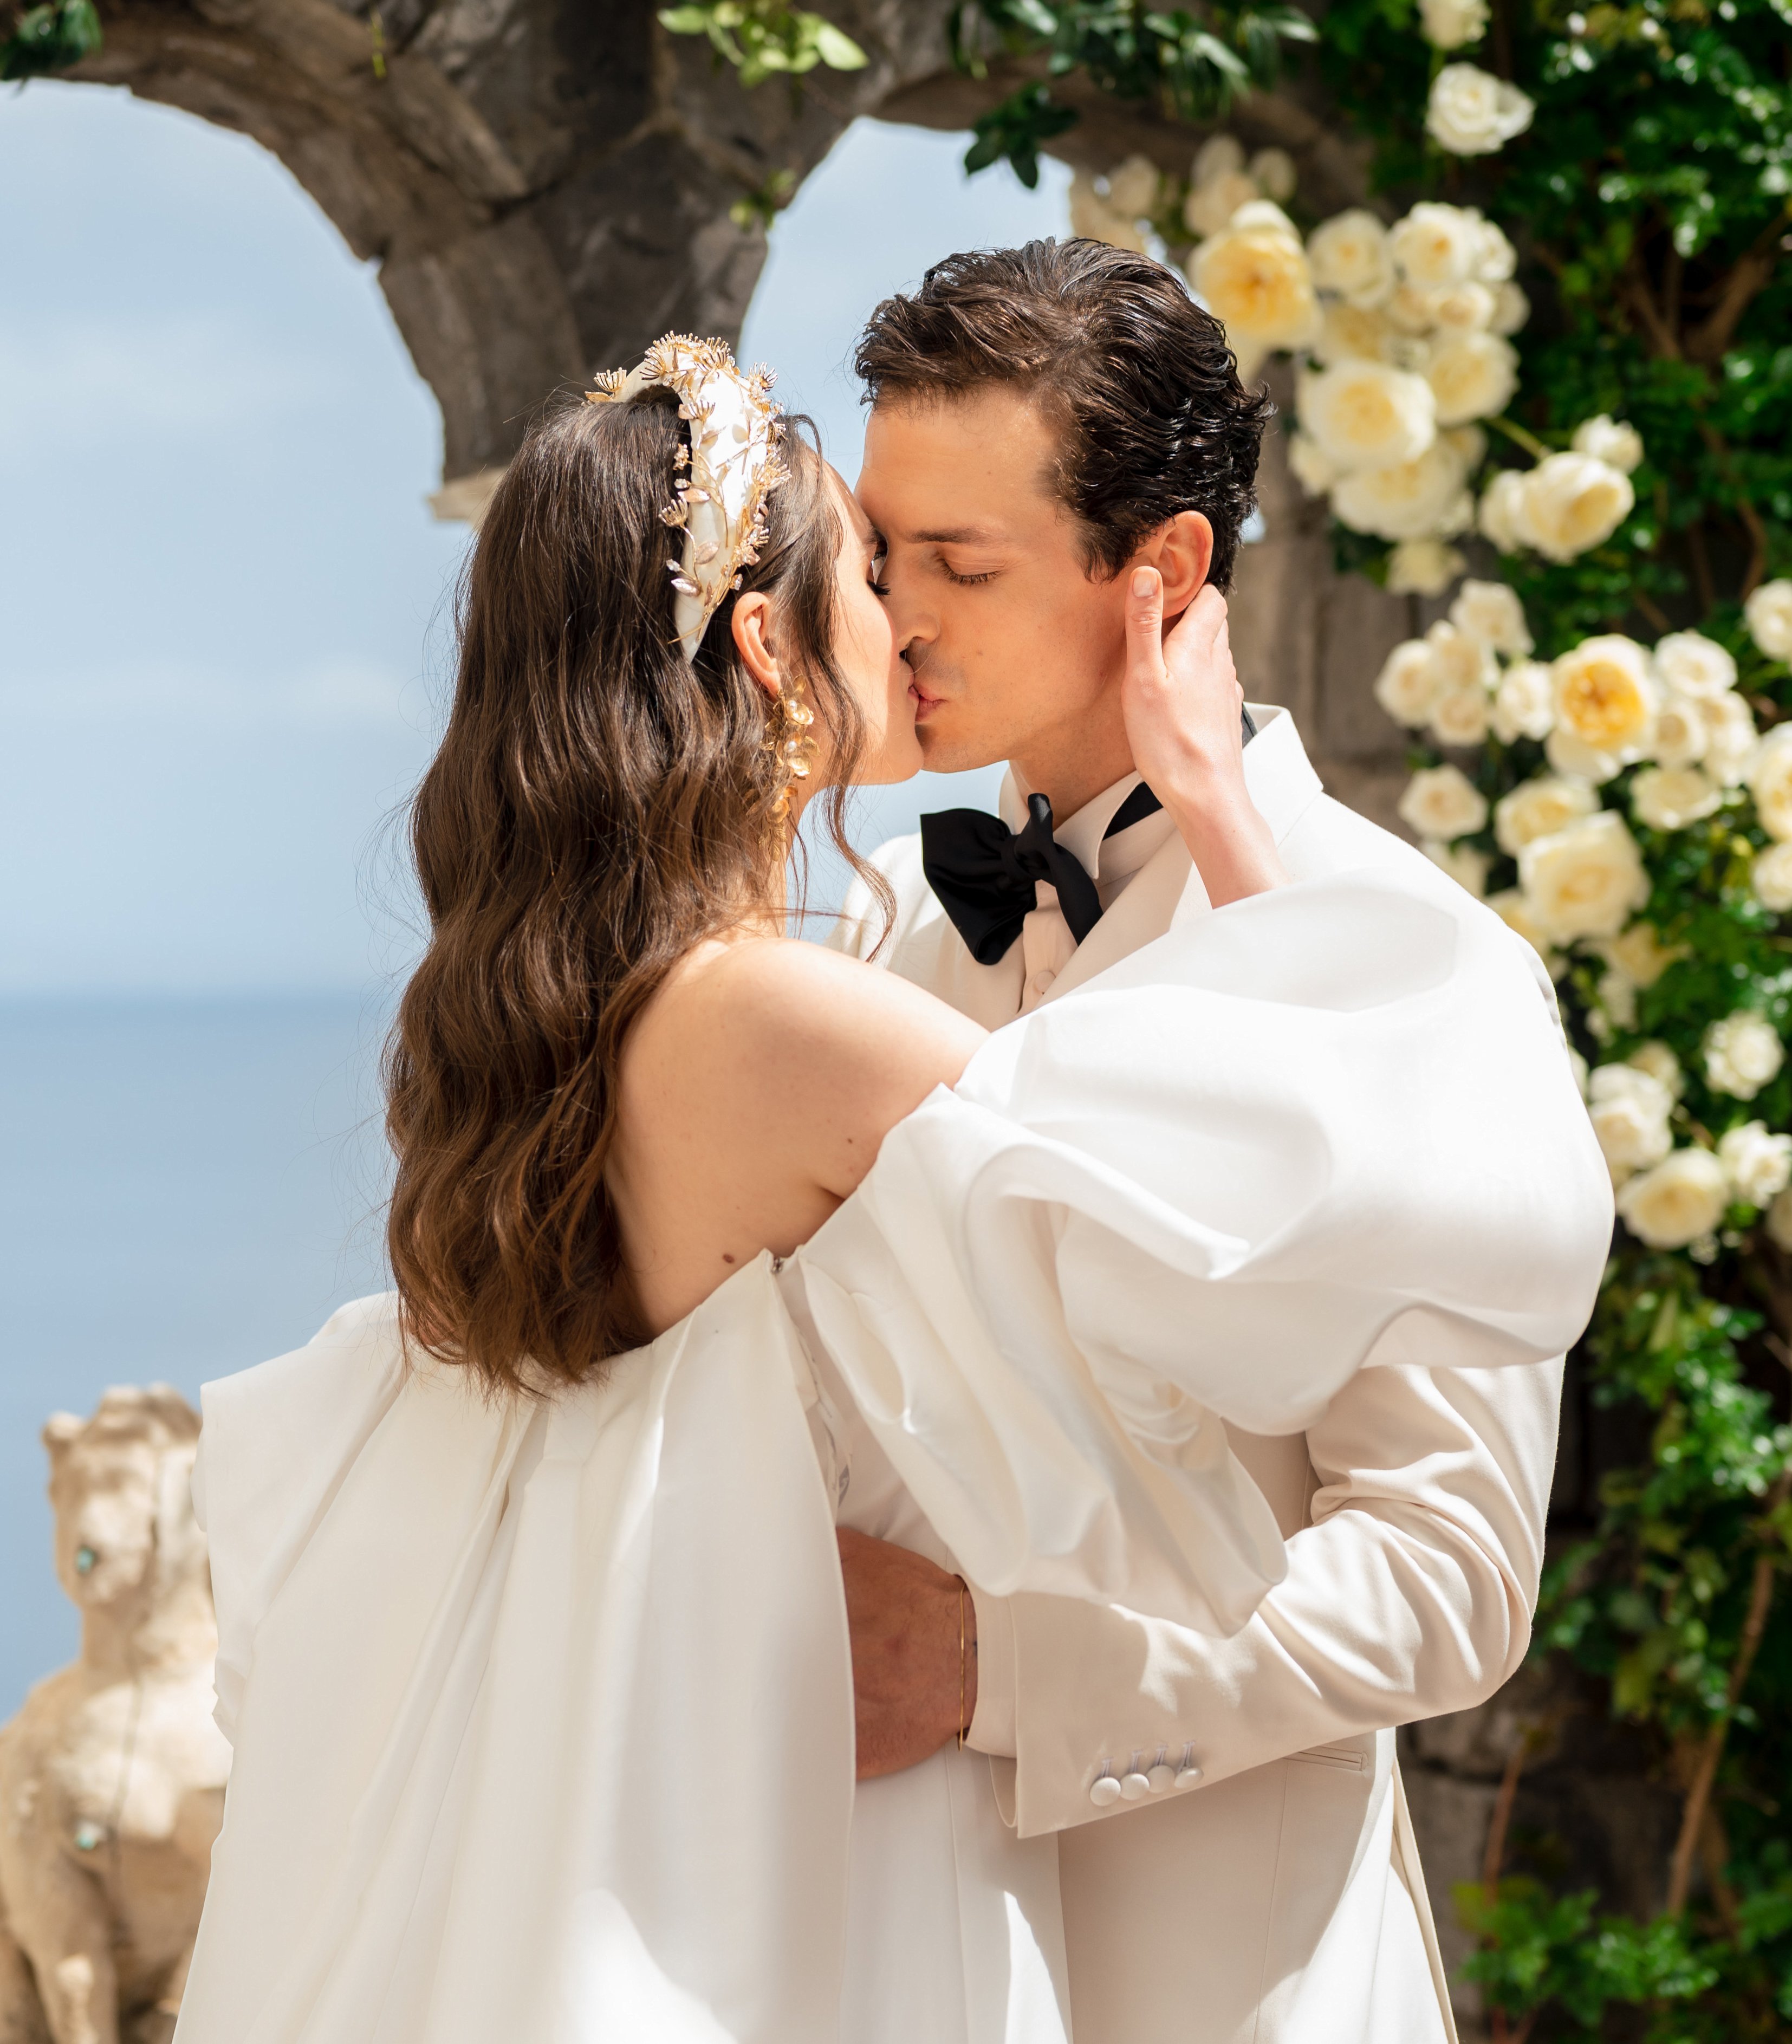 A bride and groom kiss at the altar with the ocean behind them in Amalfi Coast, Italy.